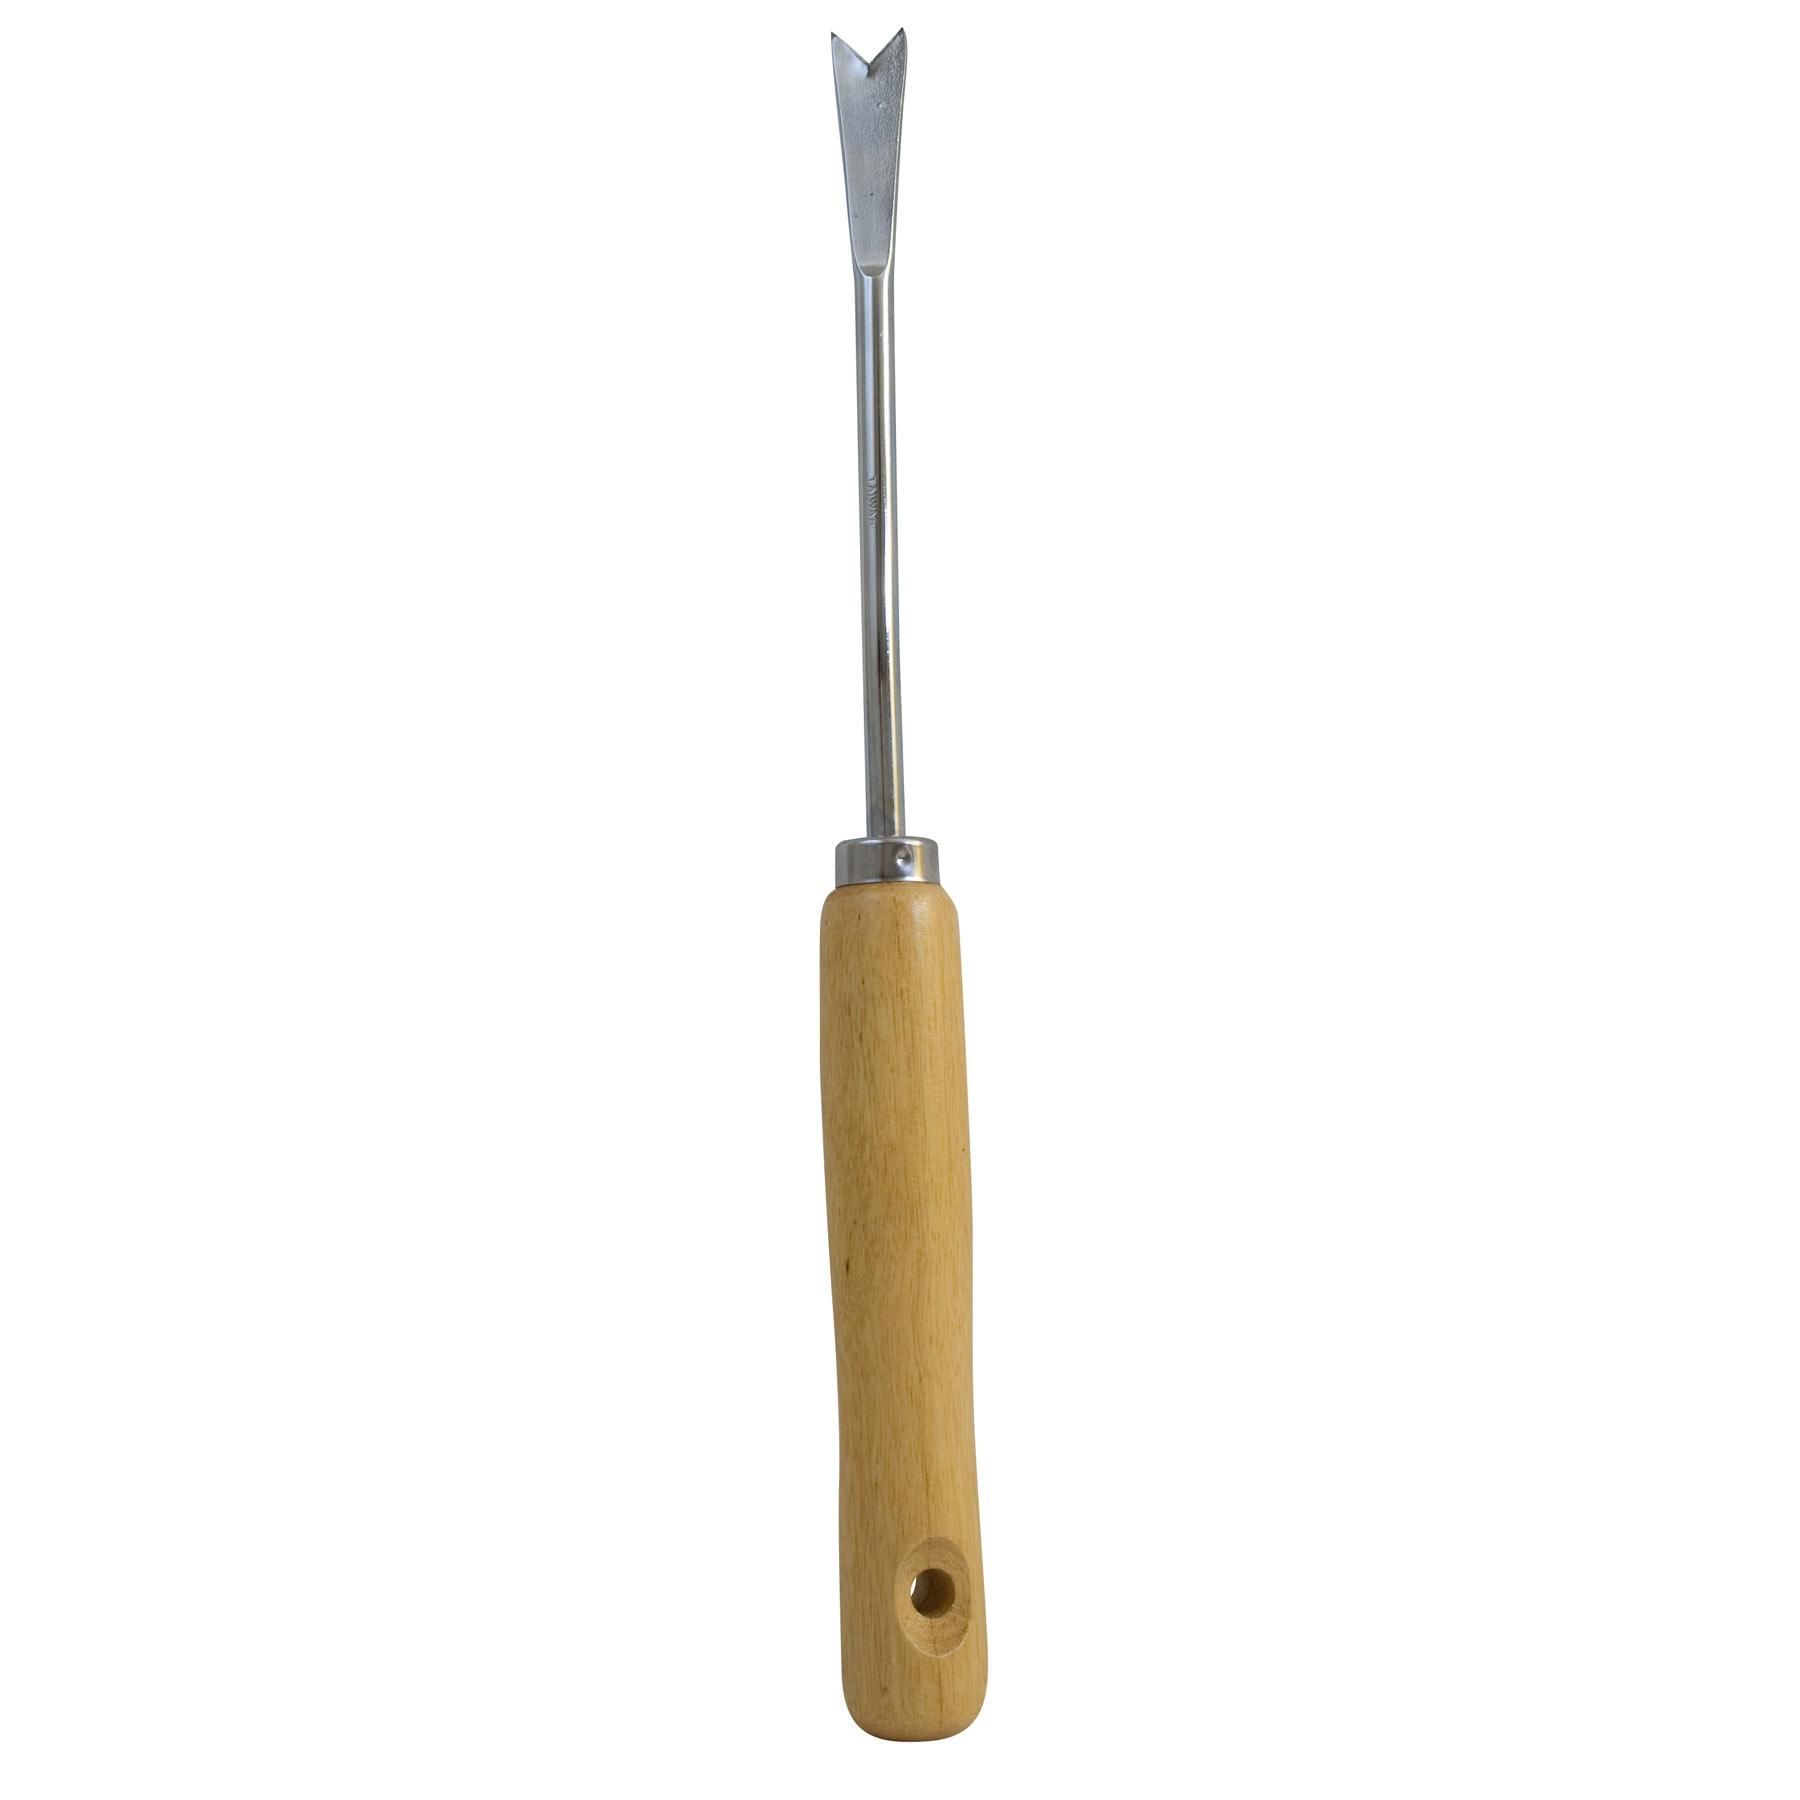 product name flexrake lrb29d hand weeder with chrome plated head